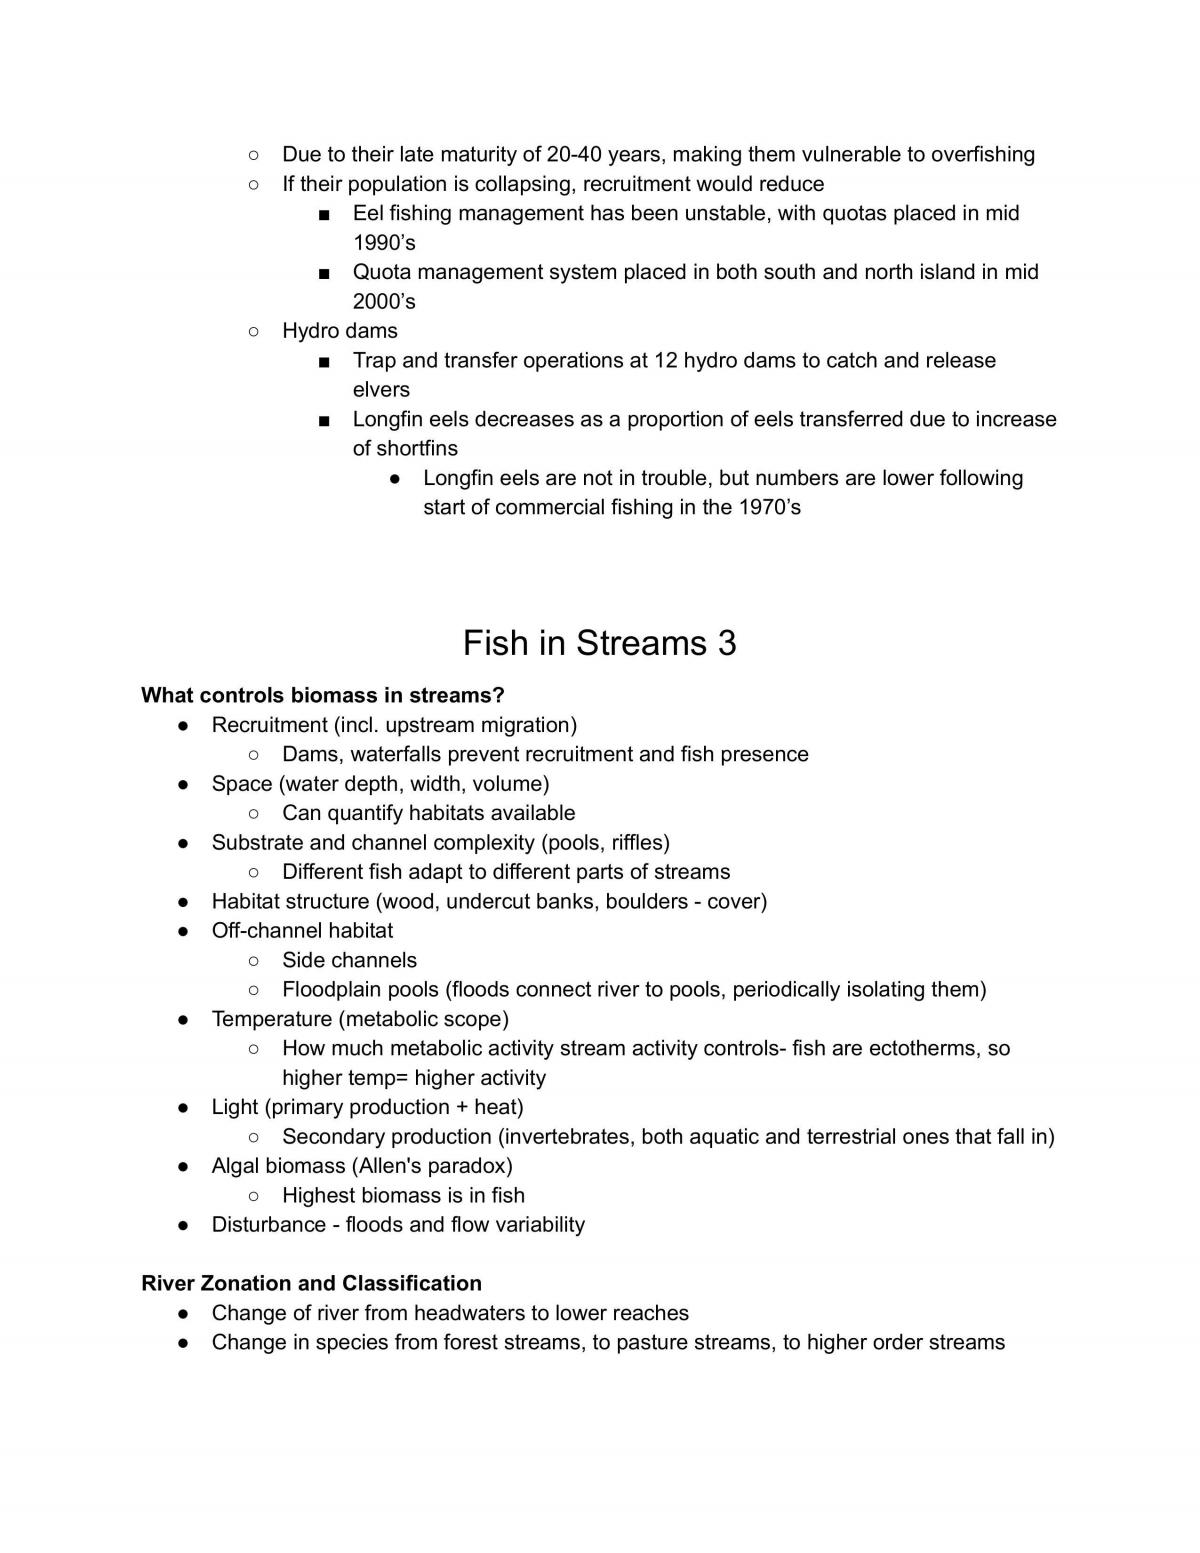 BIOEB304 Freshwater Ecology Complete Notes - Page 49